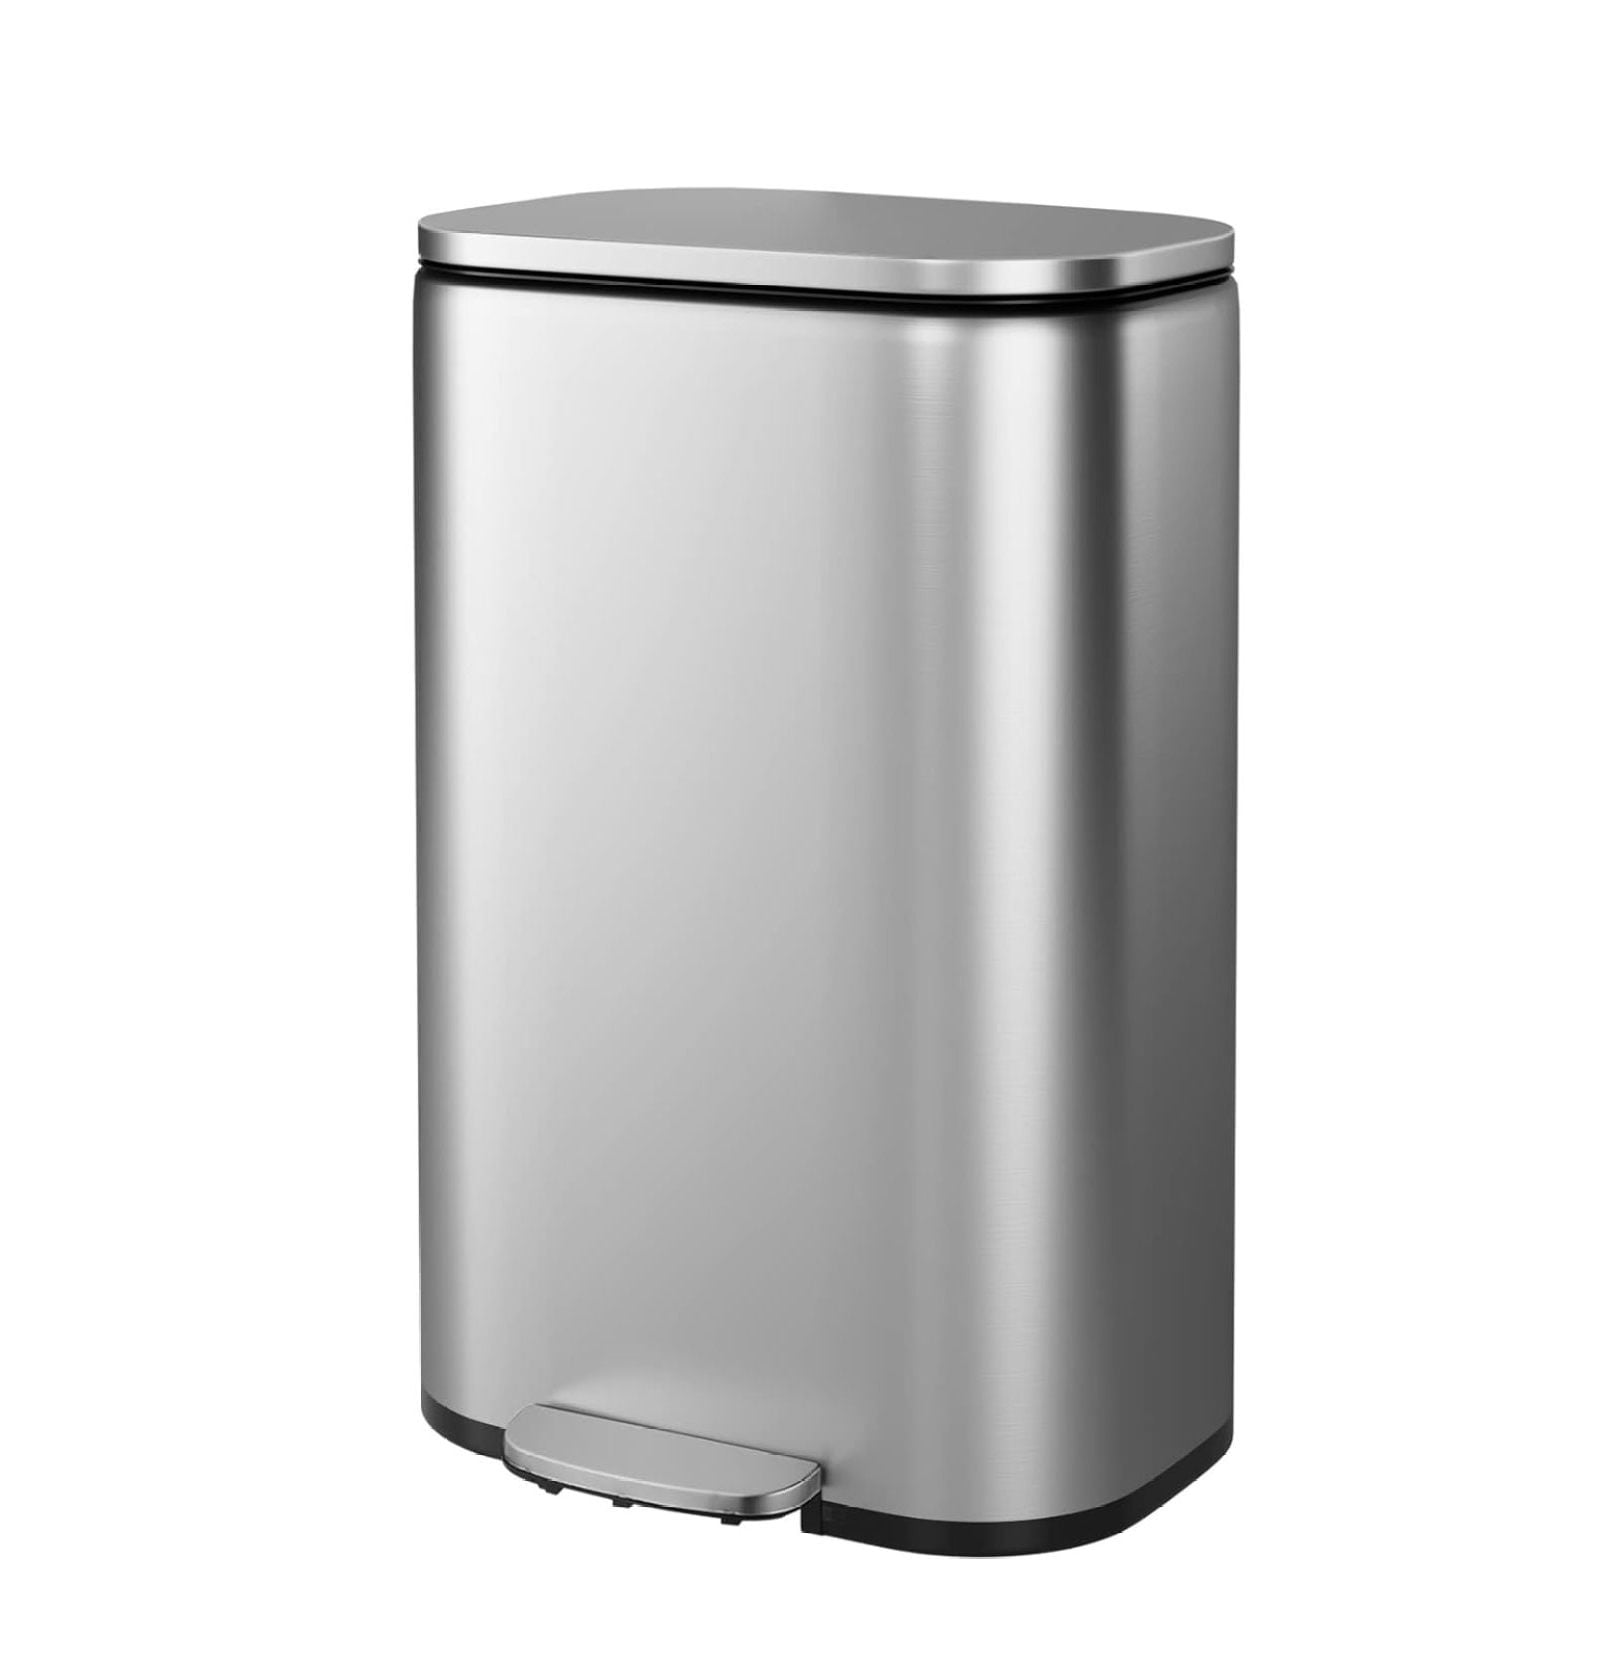 CRIXLHIX Trash Can, Stainless Steel Garbage Can with Silent Lid ...